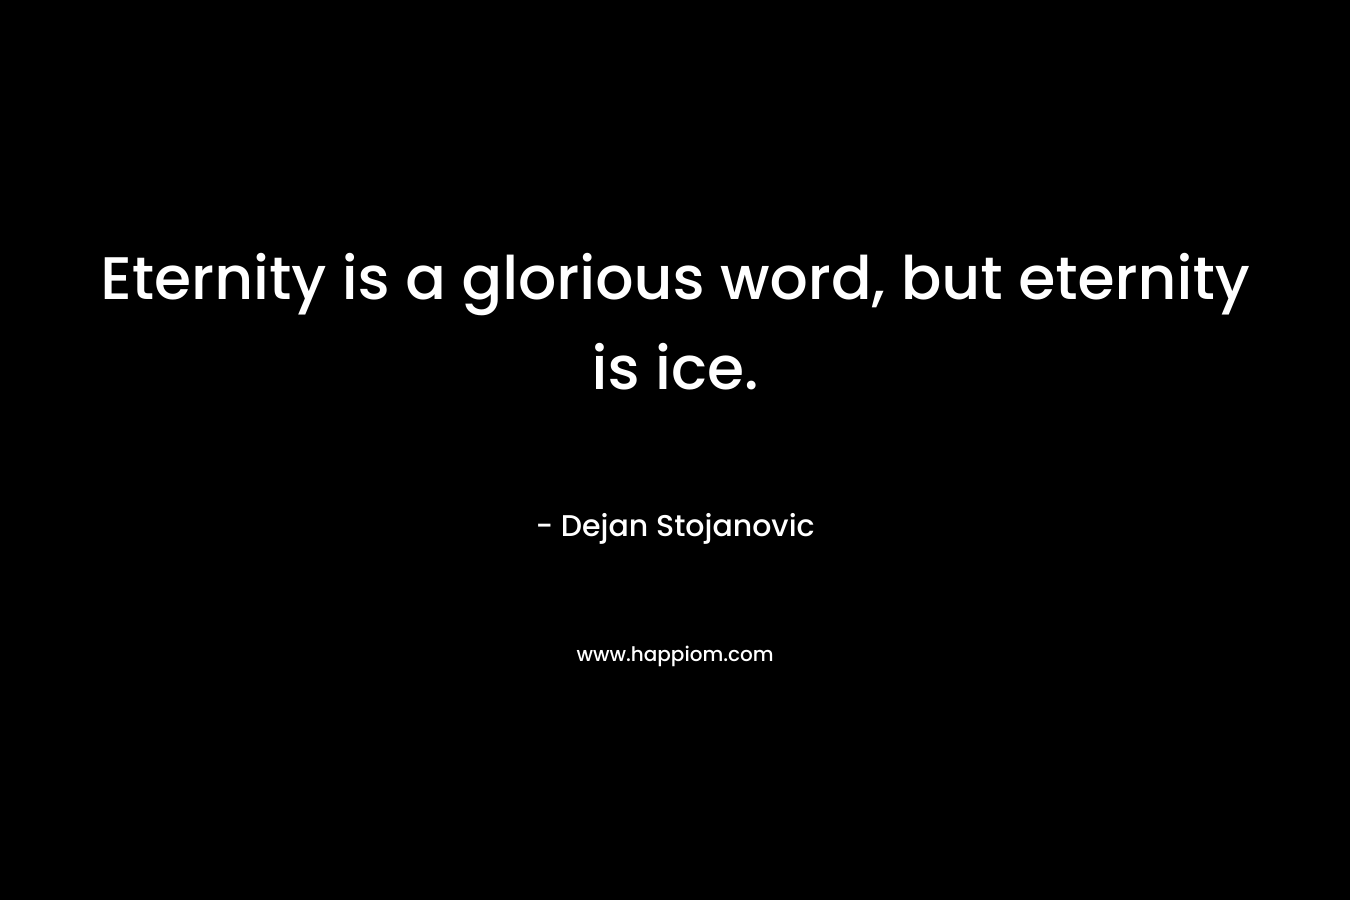 Eternity is a glorious word, but eternity is ice.